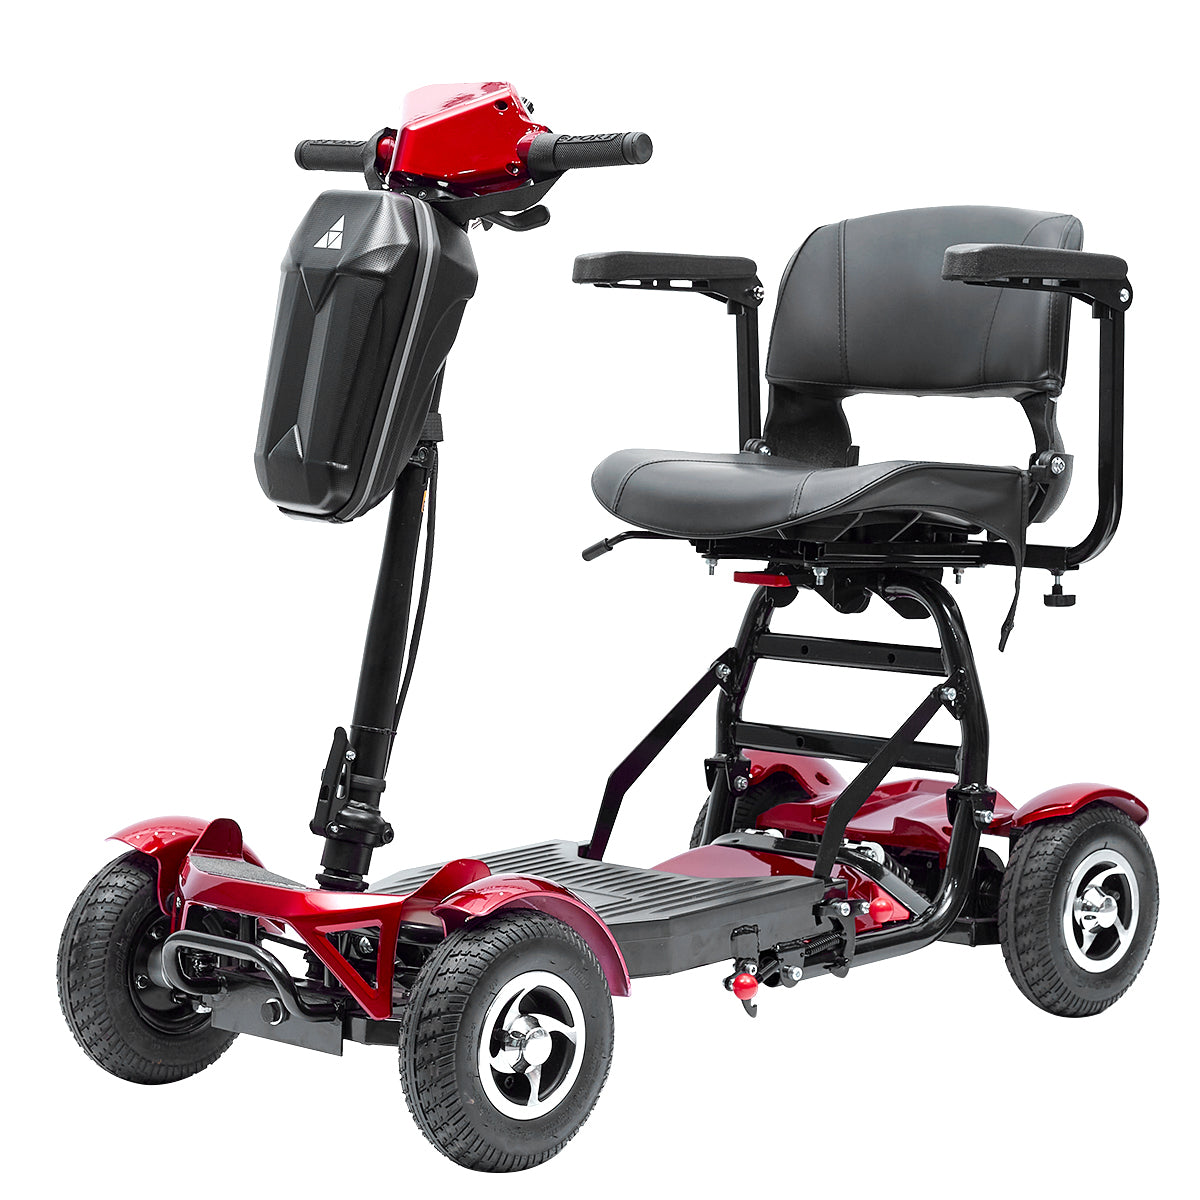 NEW Hecare Instafold folding Lightweight Portable mobility scooter shoprider UK